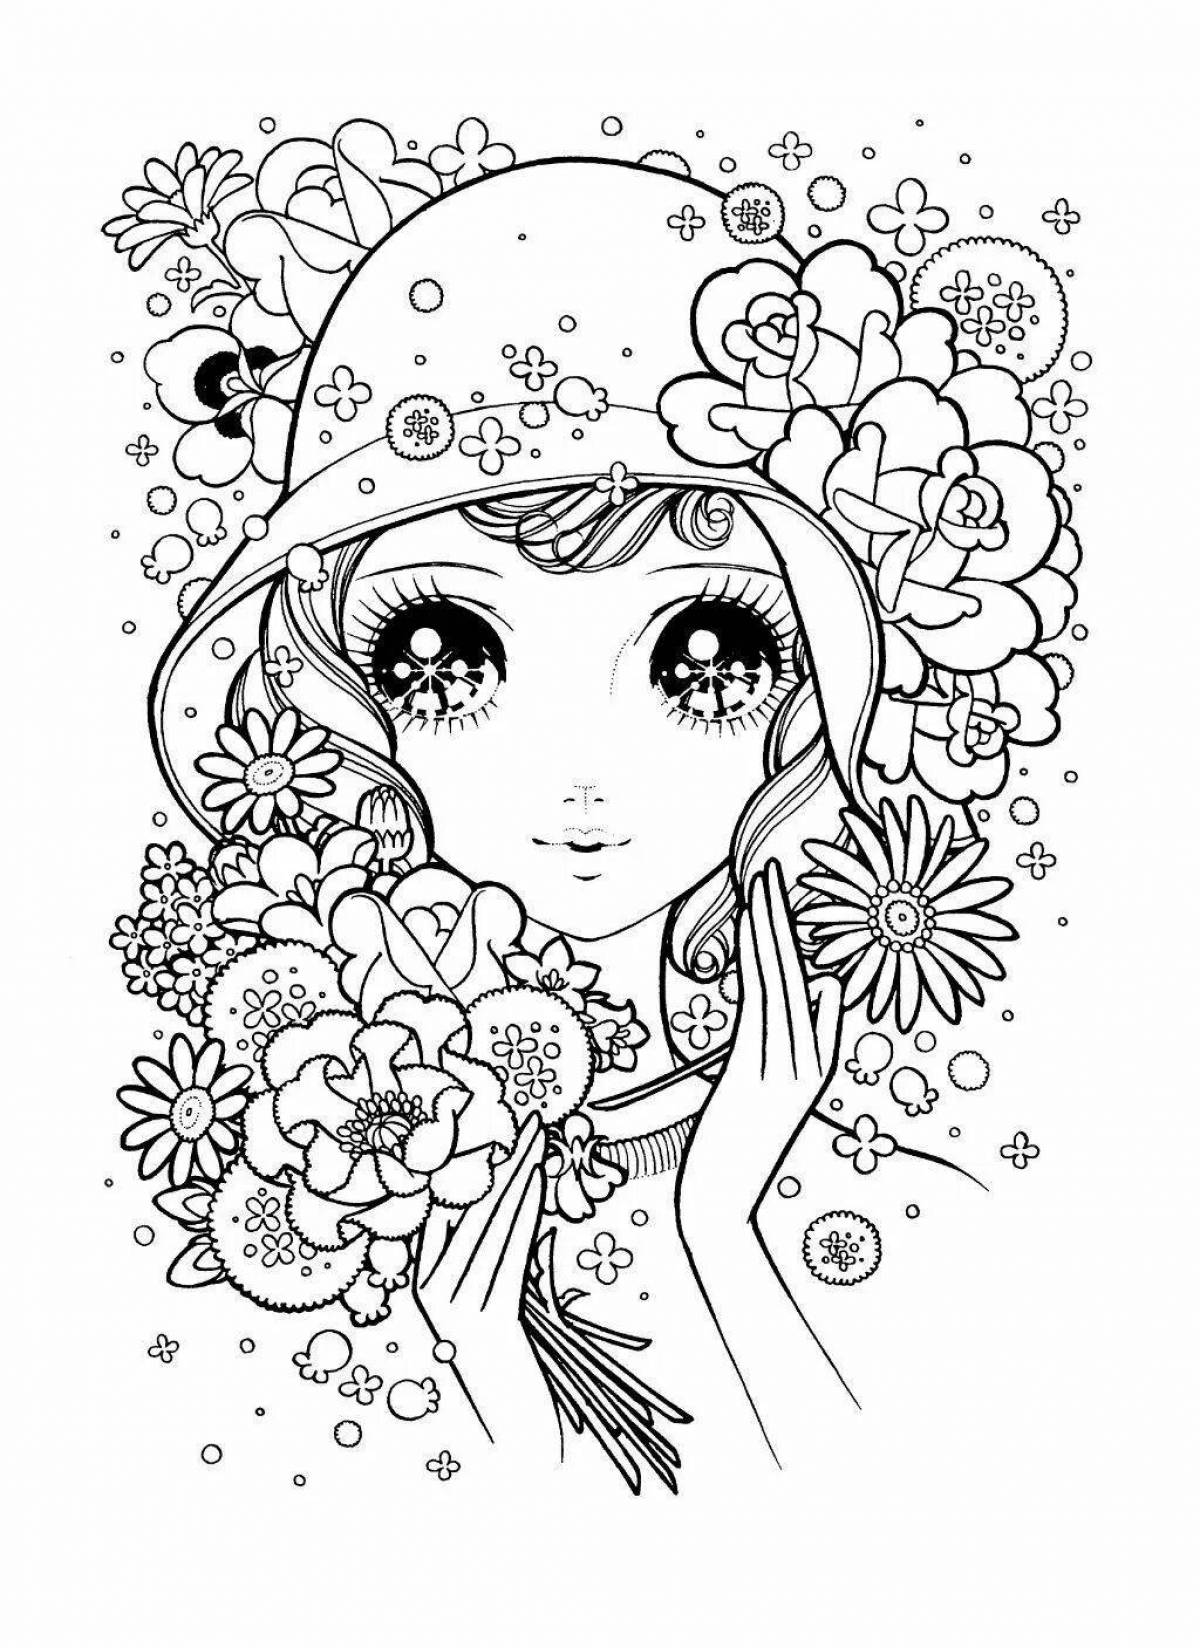 Playful anti-stress coloring book for girls 8 years old